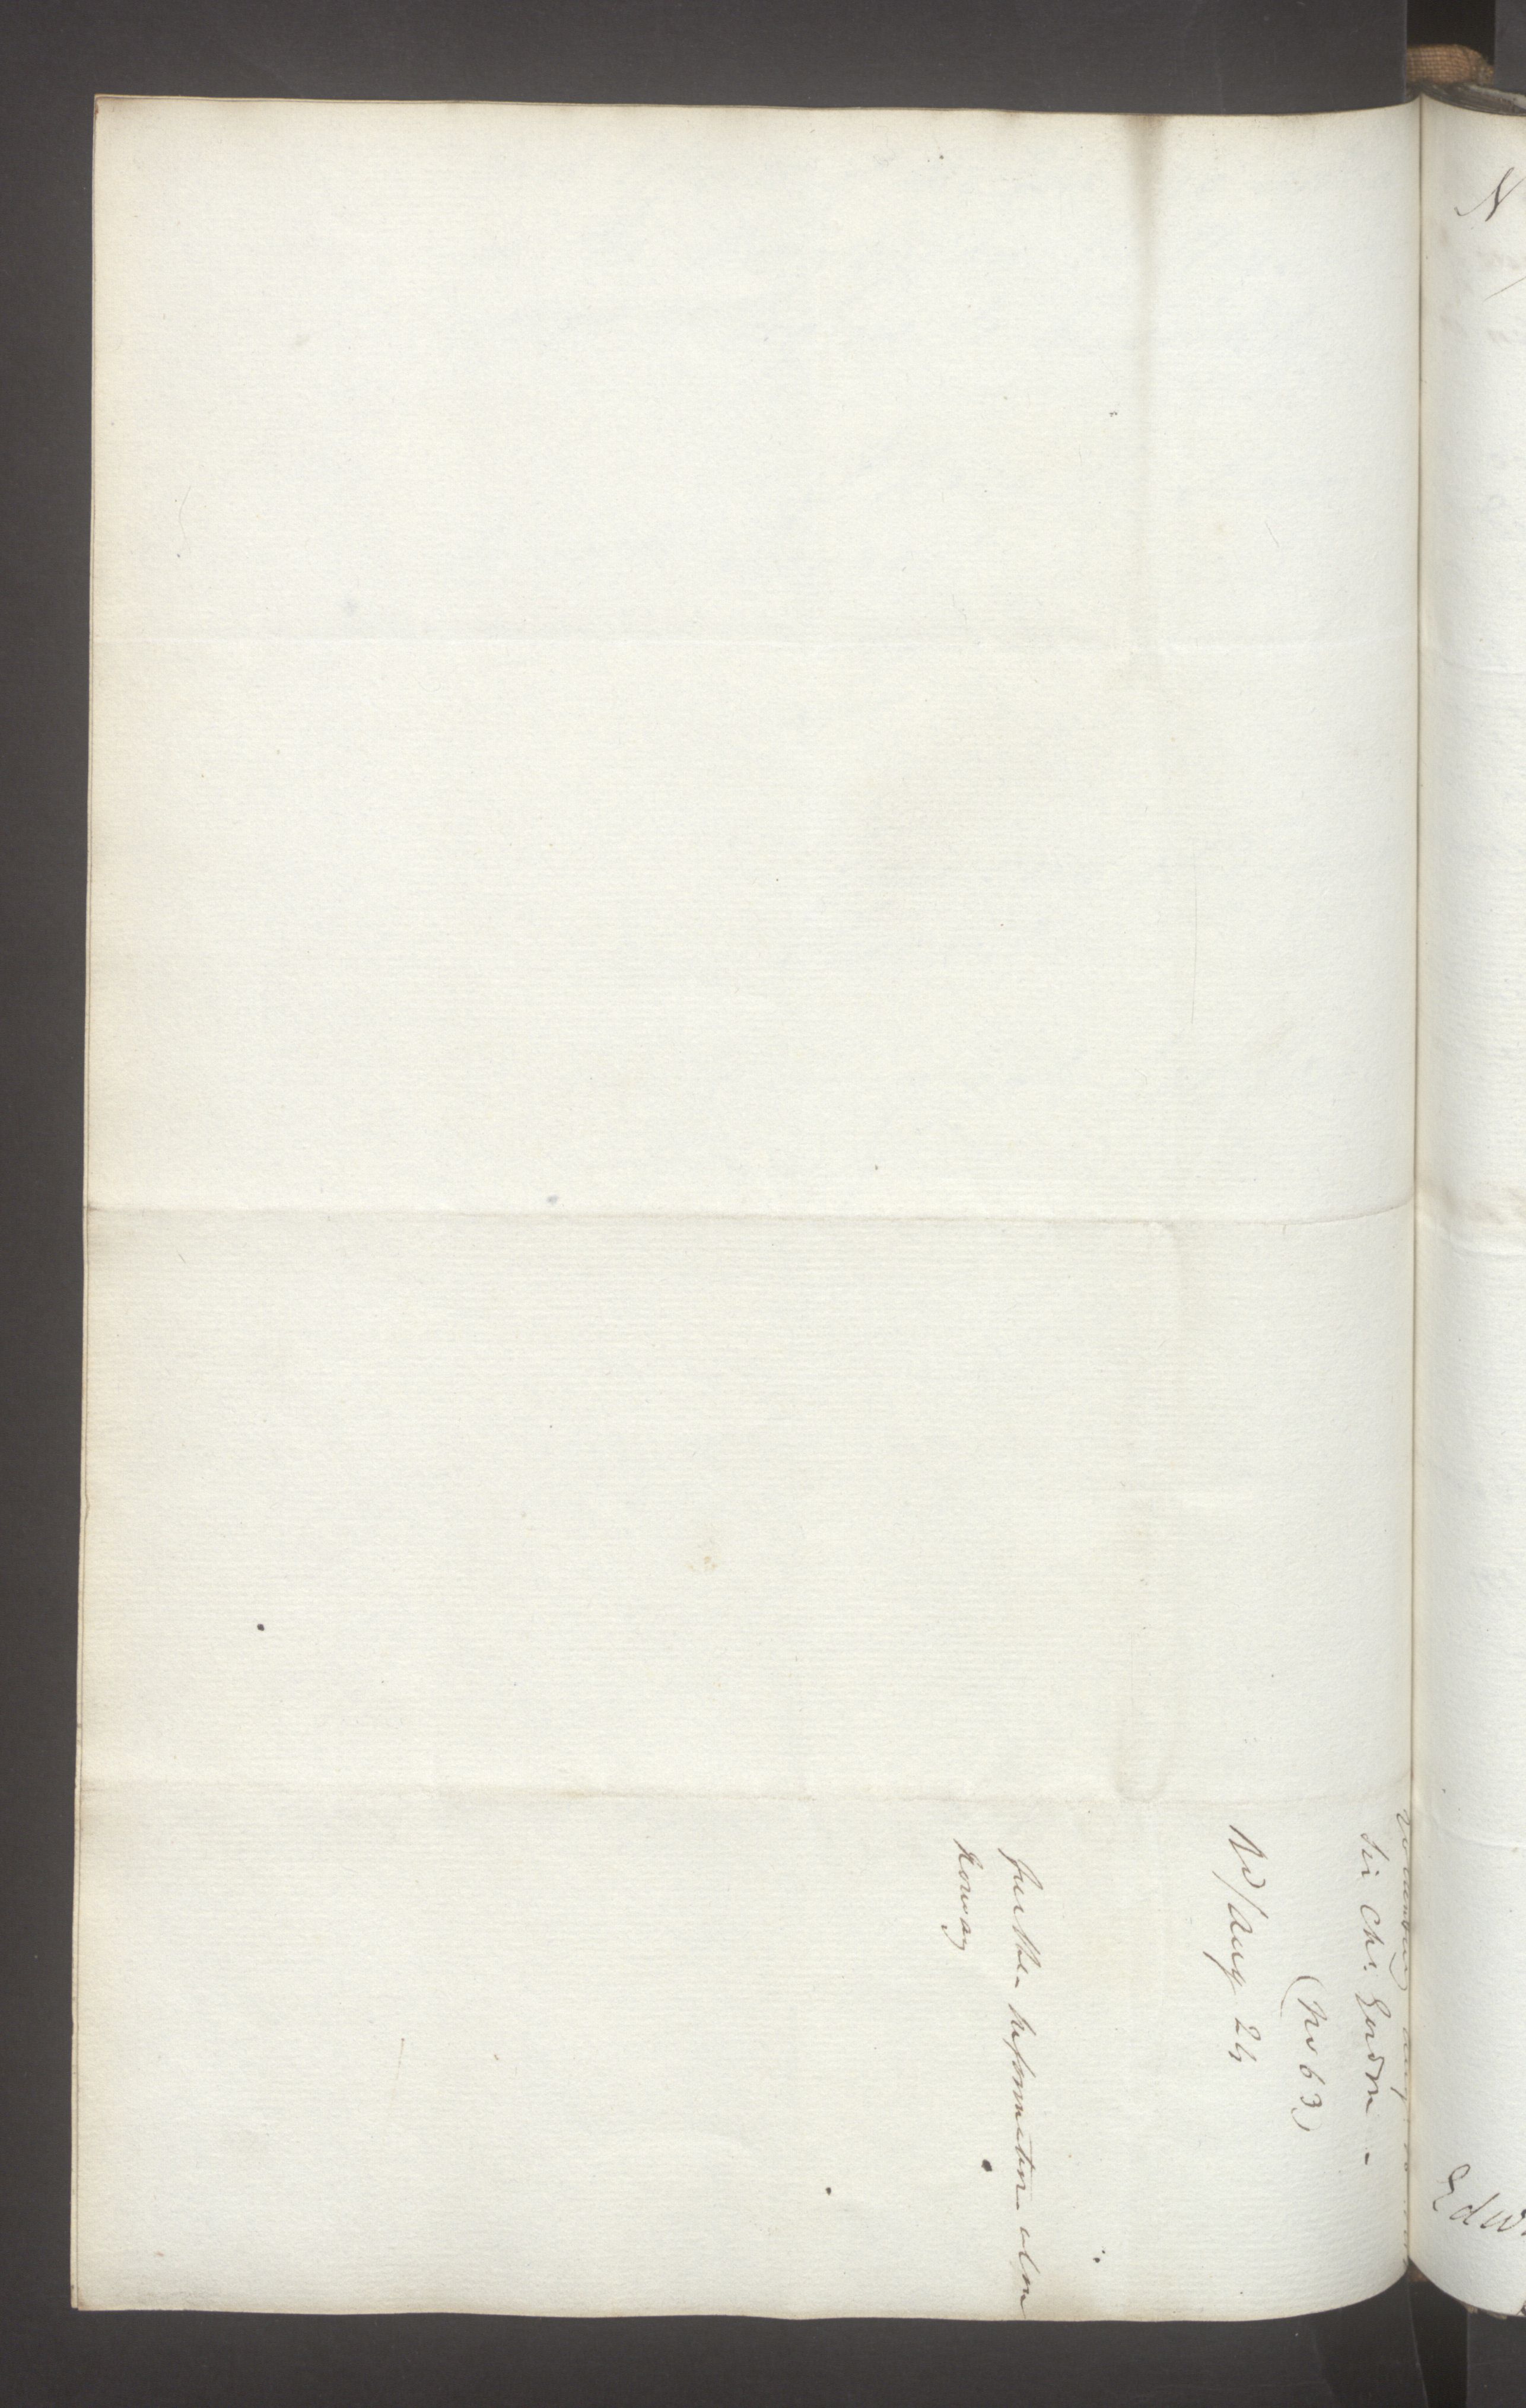 Foreign Office*, UKA/-/FO 38/16: Sir C. Gordon. Reports from Malmö, Jonkoping, and Helsingborg, 1814, p. 85